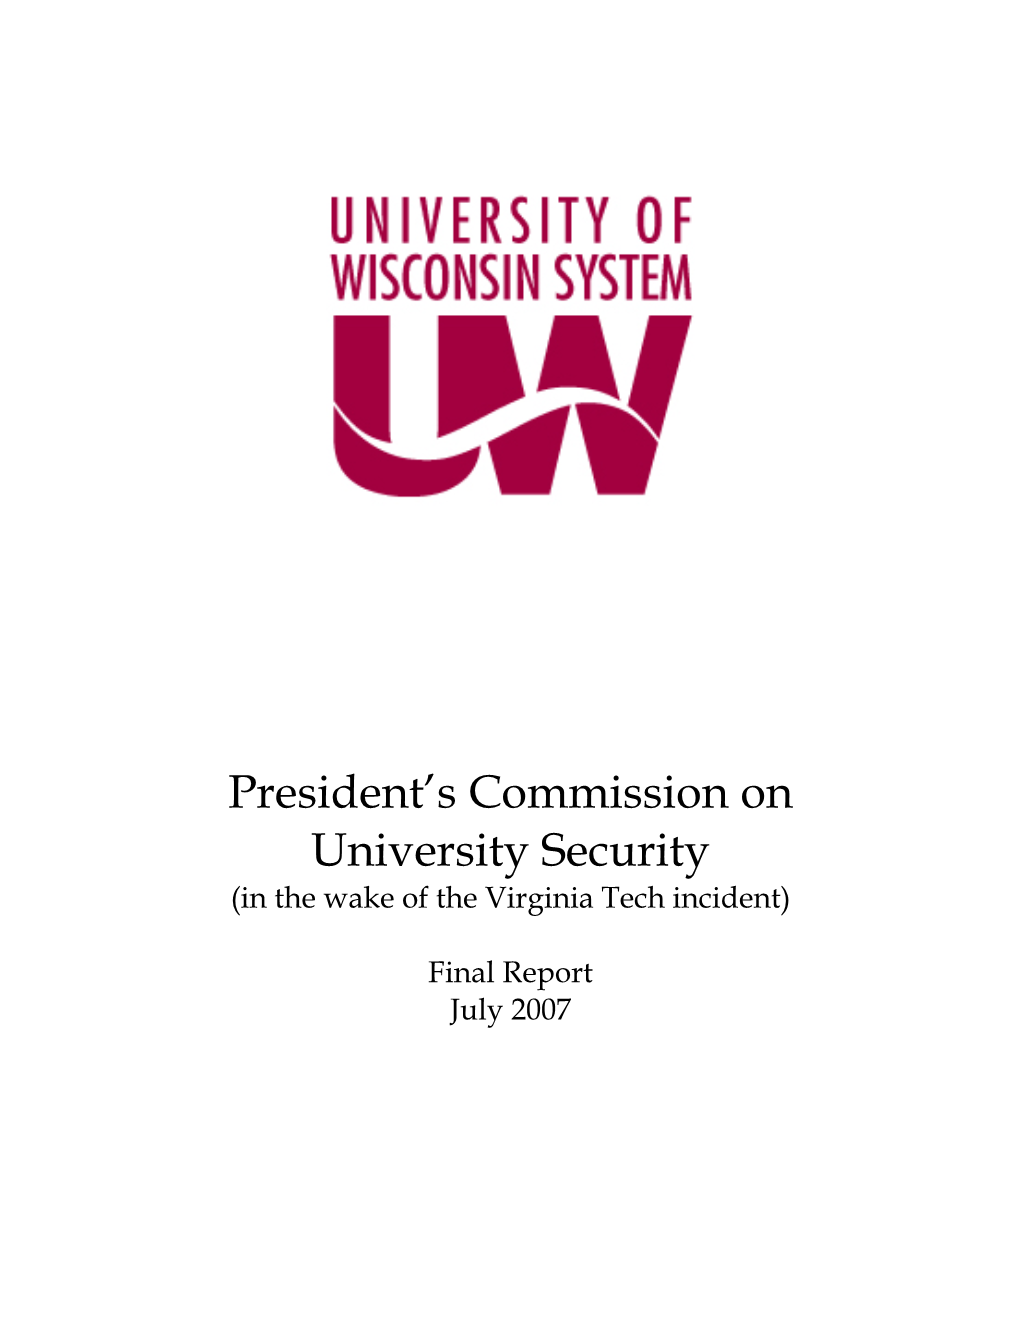 President's Commission on University Security